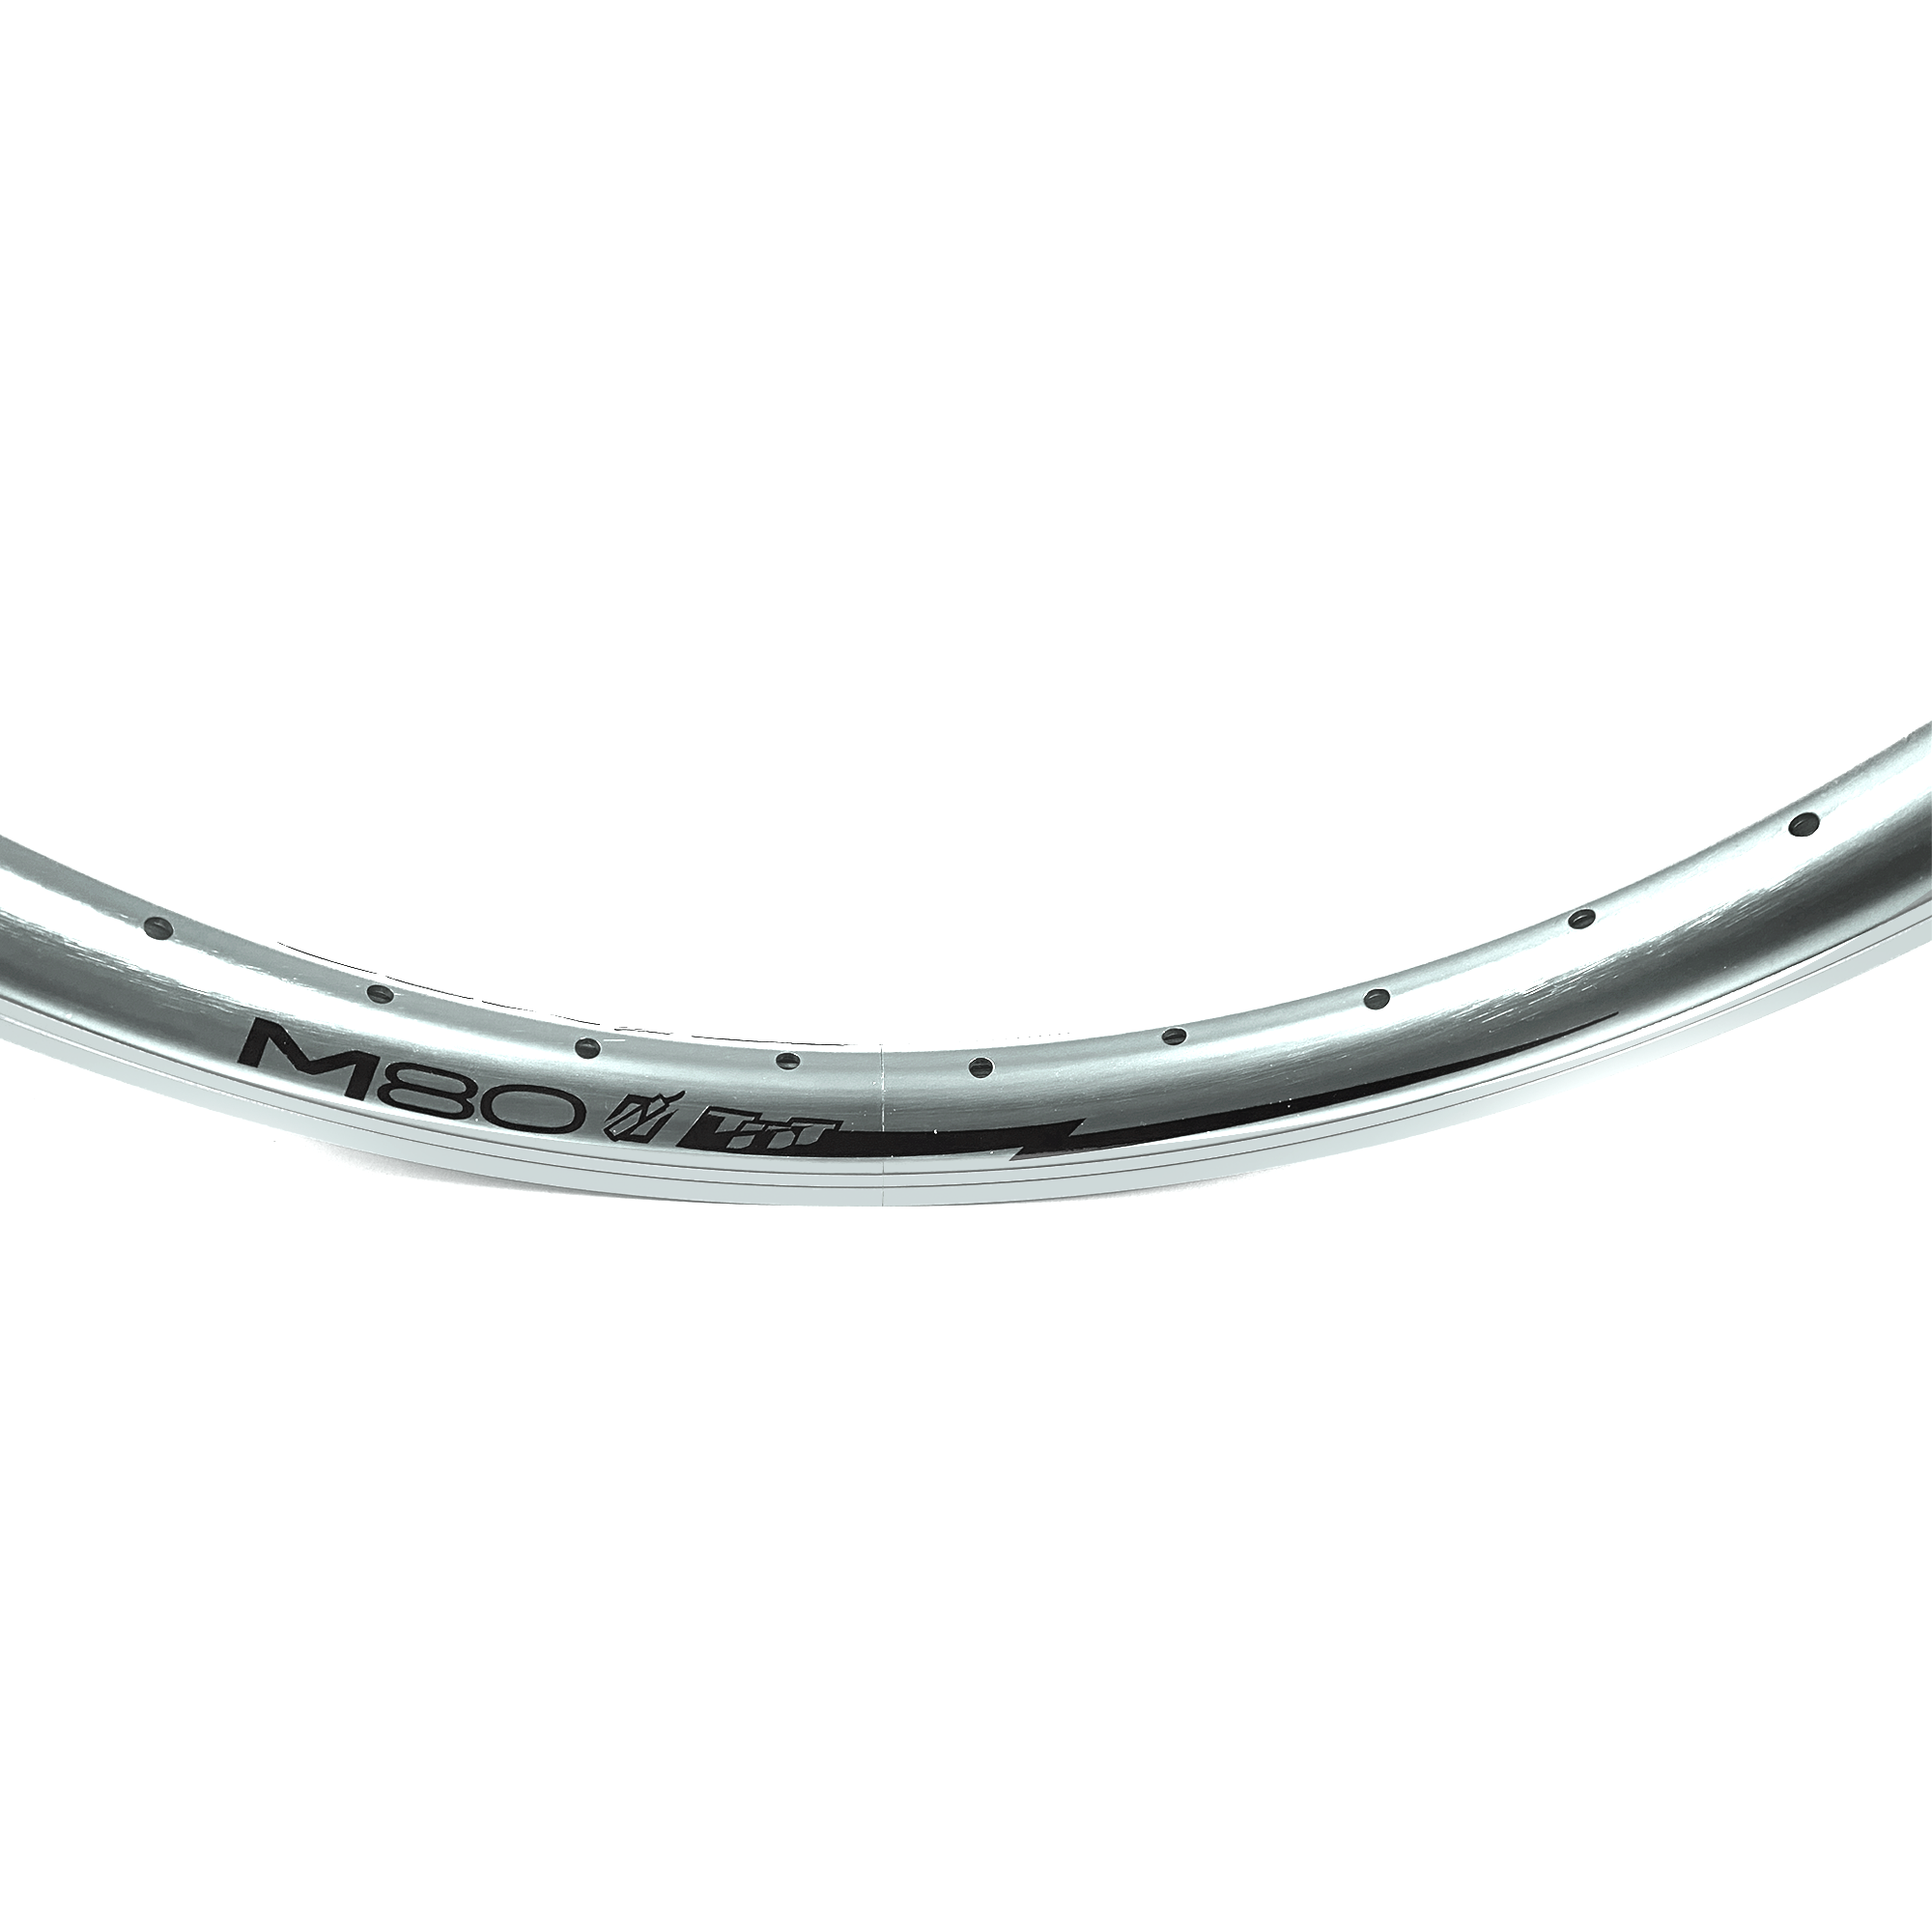 20" (406mm) TNT M80X Double Wall Rim - 28H - Silver Anodized